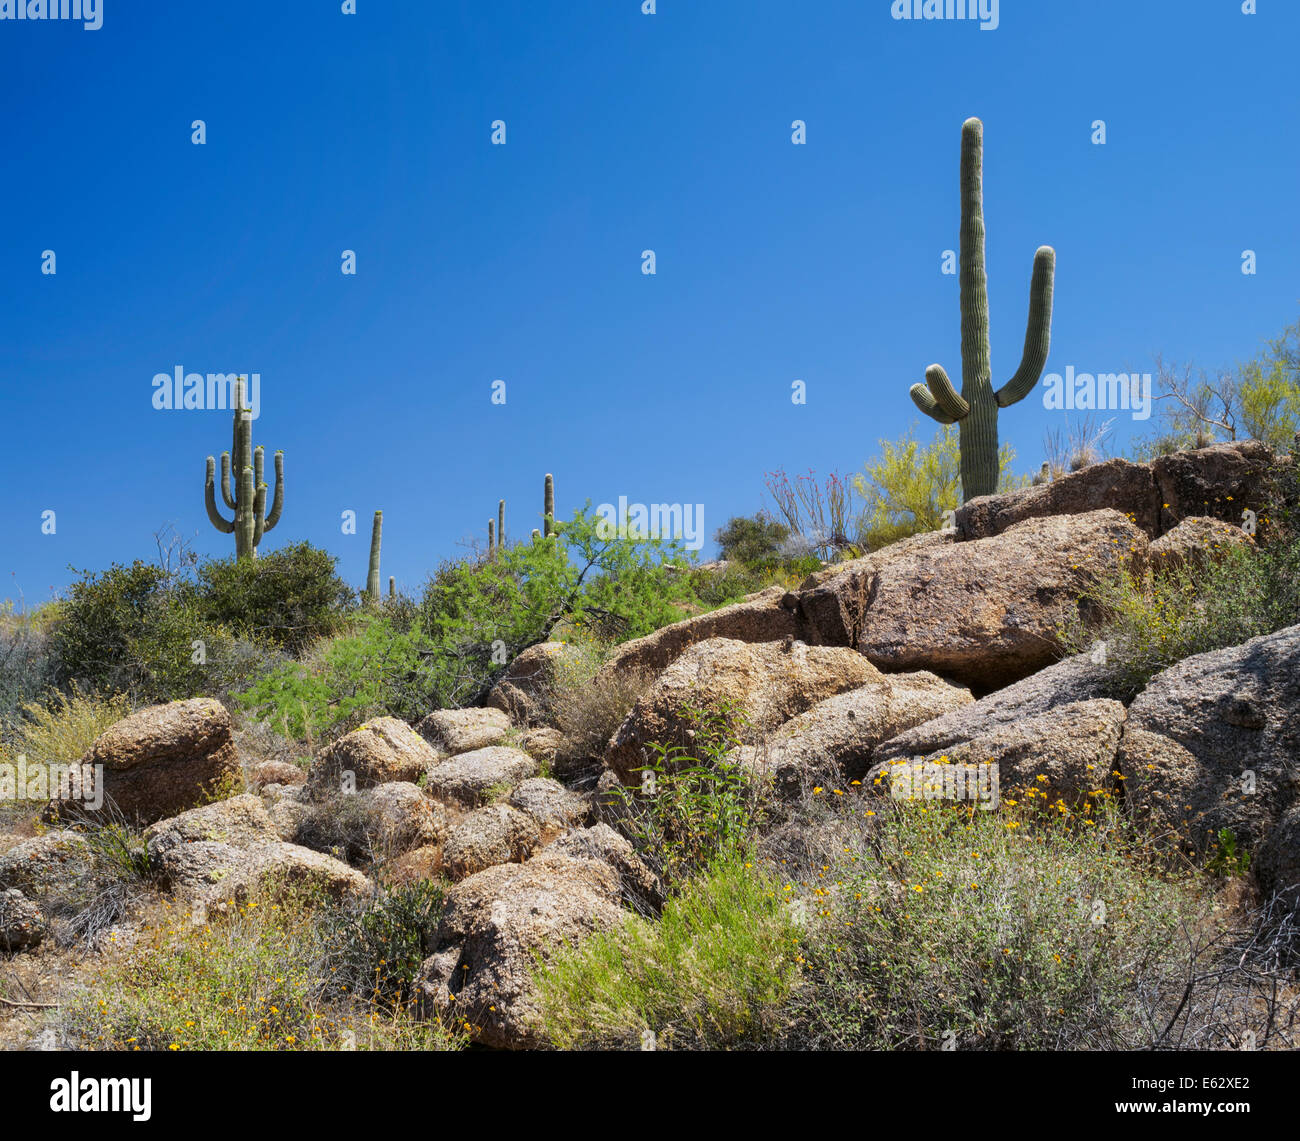 Giant saguaro cacti and desert wildflowers, Sonoran Desert, Scottsdale, Arizona, spring 2014 with clear blue sky and copy space Stock Photo